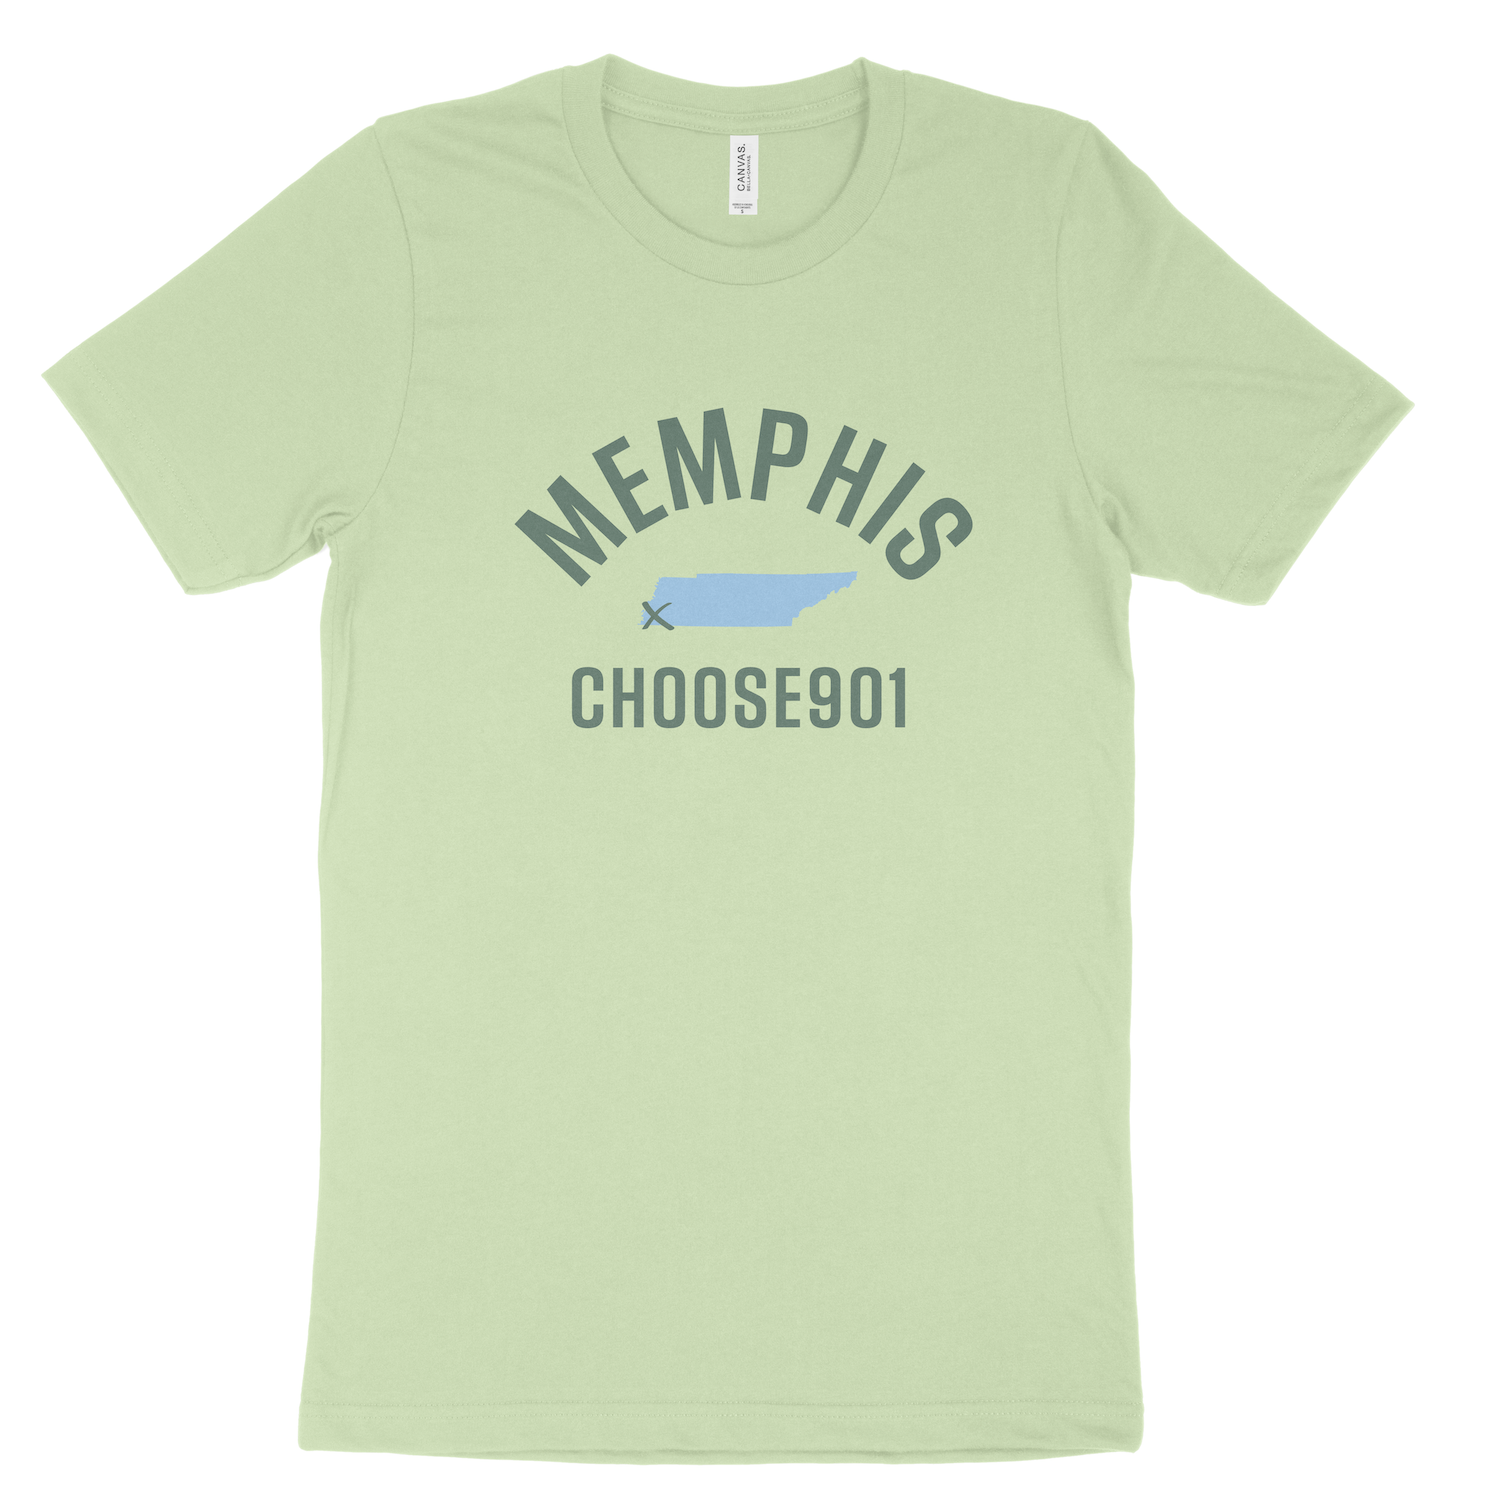 Light green Memphis x Choose901 Shirt (Spring Green) with a graphic of a paper airplane printed on the front.